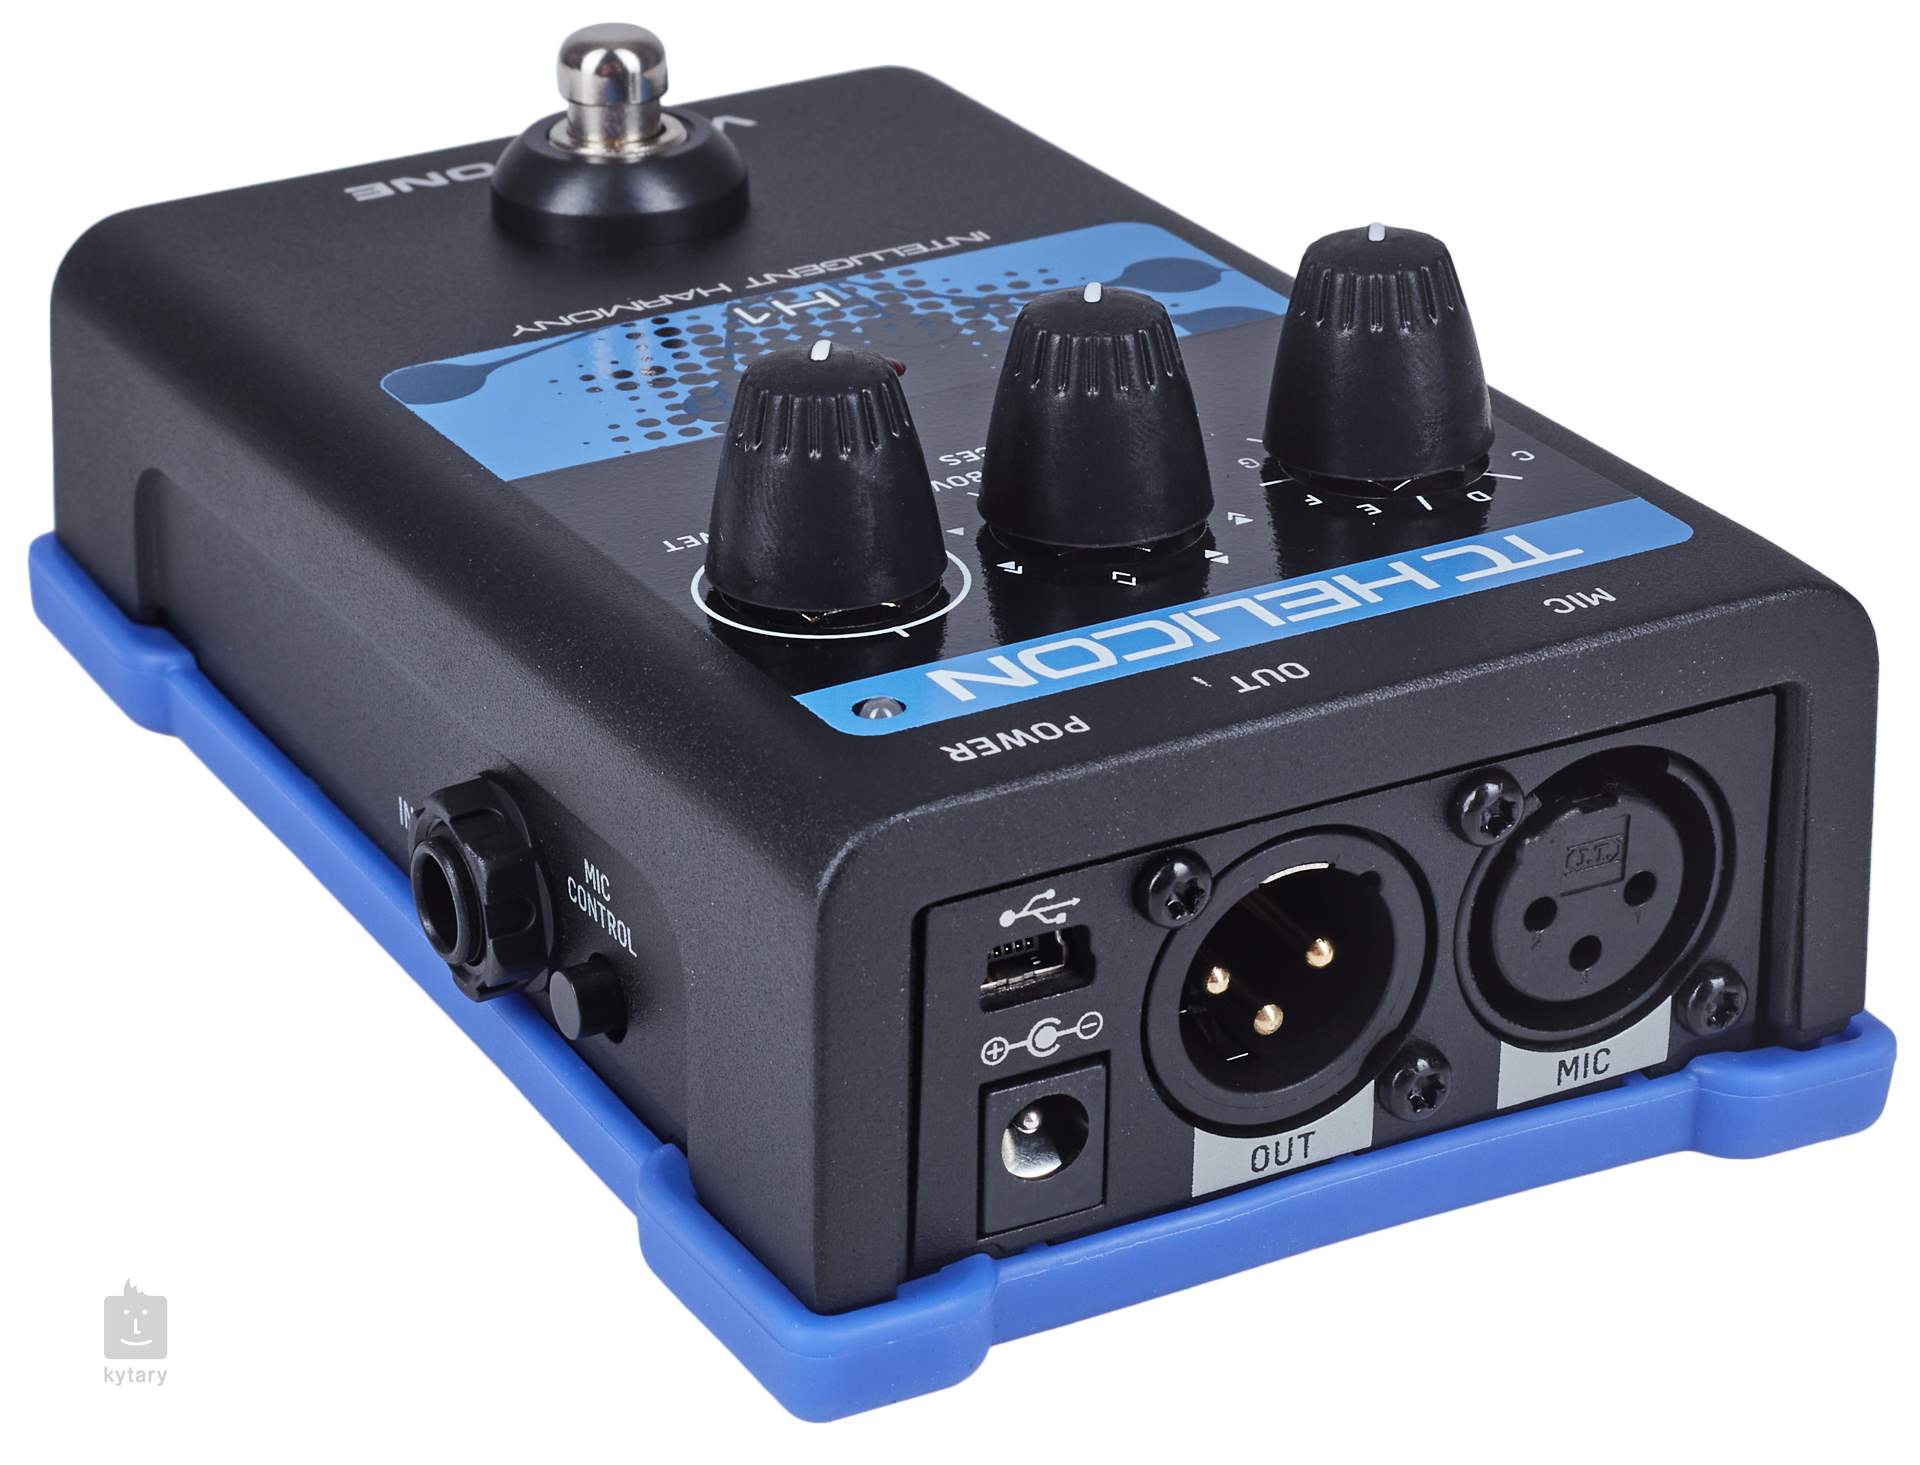 TC-HELICON Voicetone H1 Vocal Effects Processor